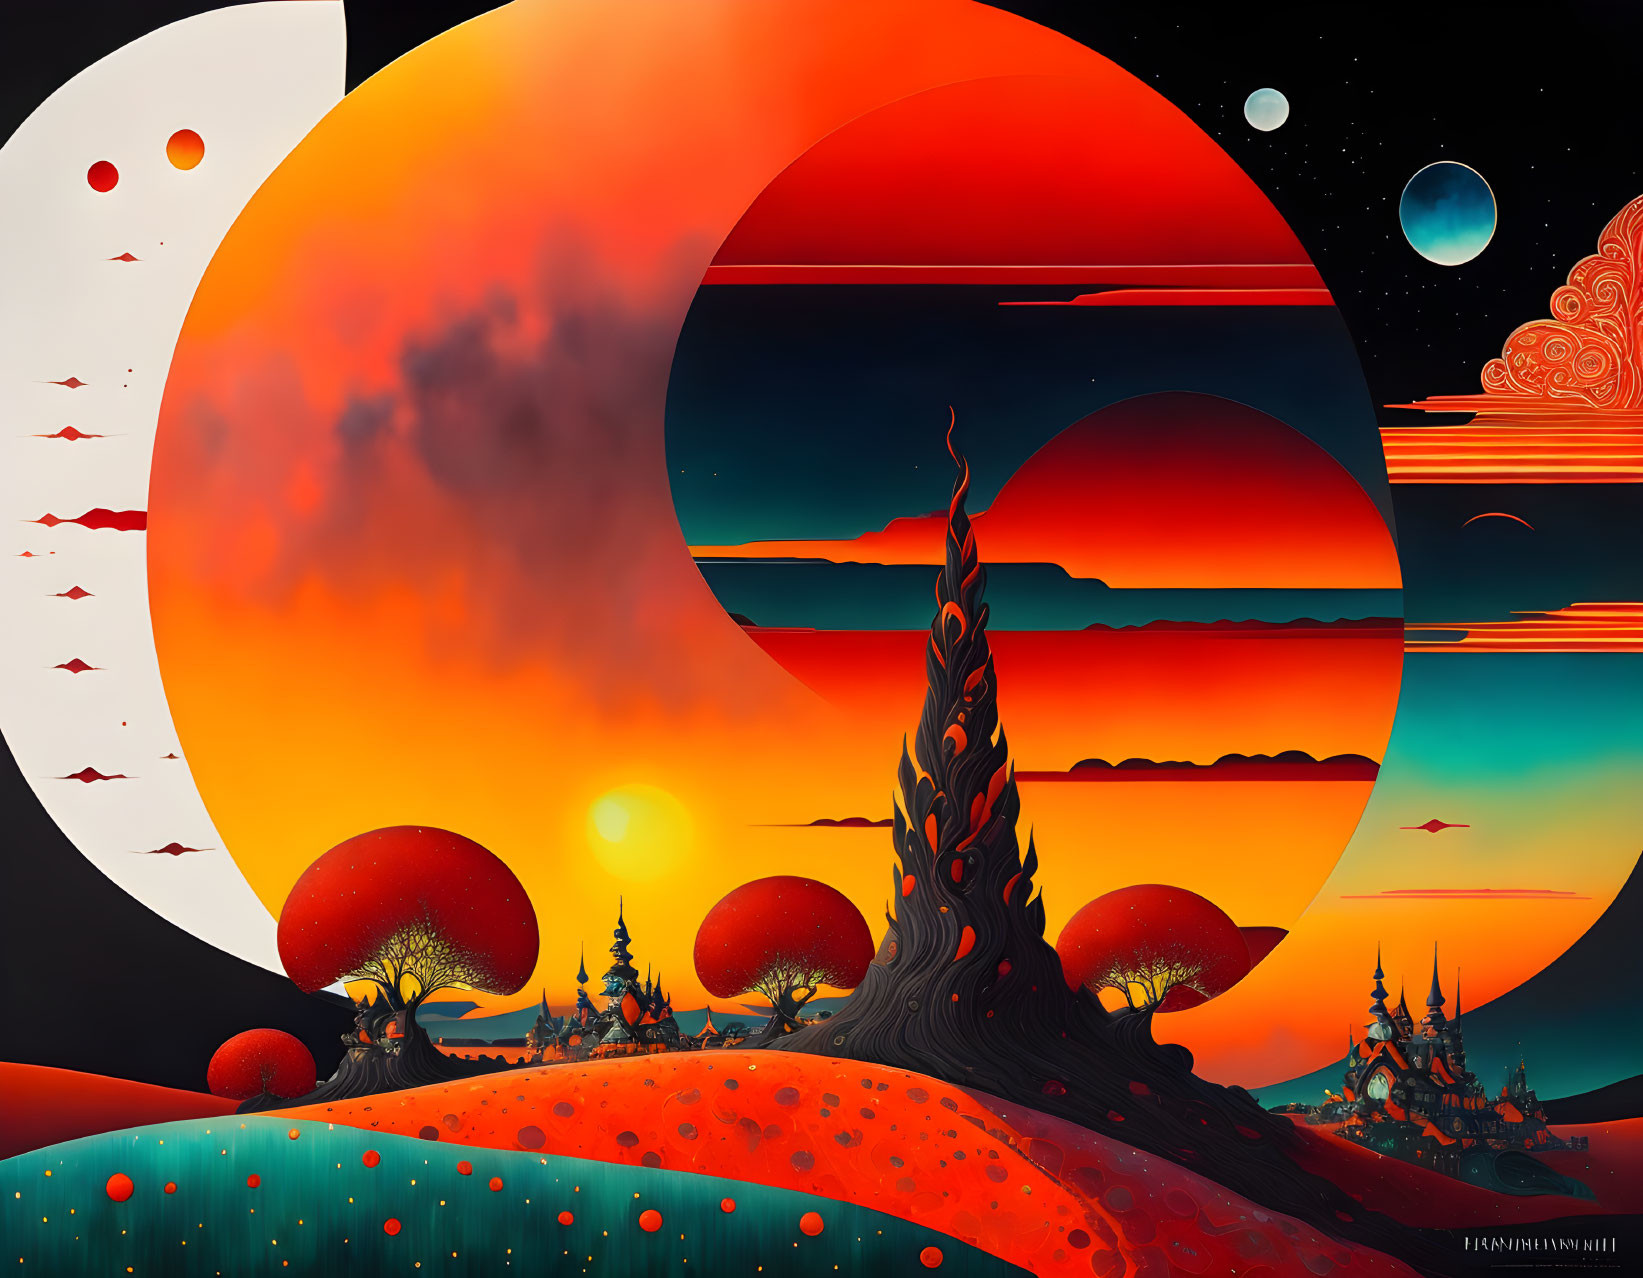 Otherworldly Landscape with Large Sun, Moons, and Vibrant Sky